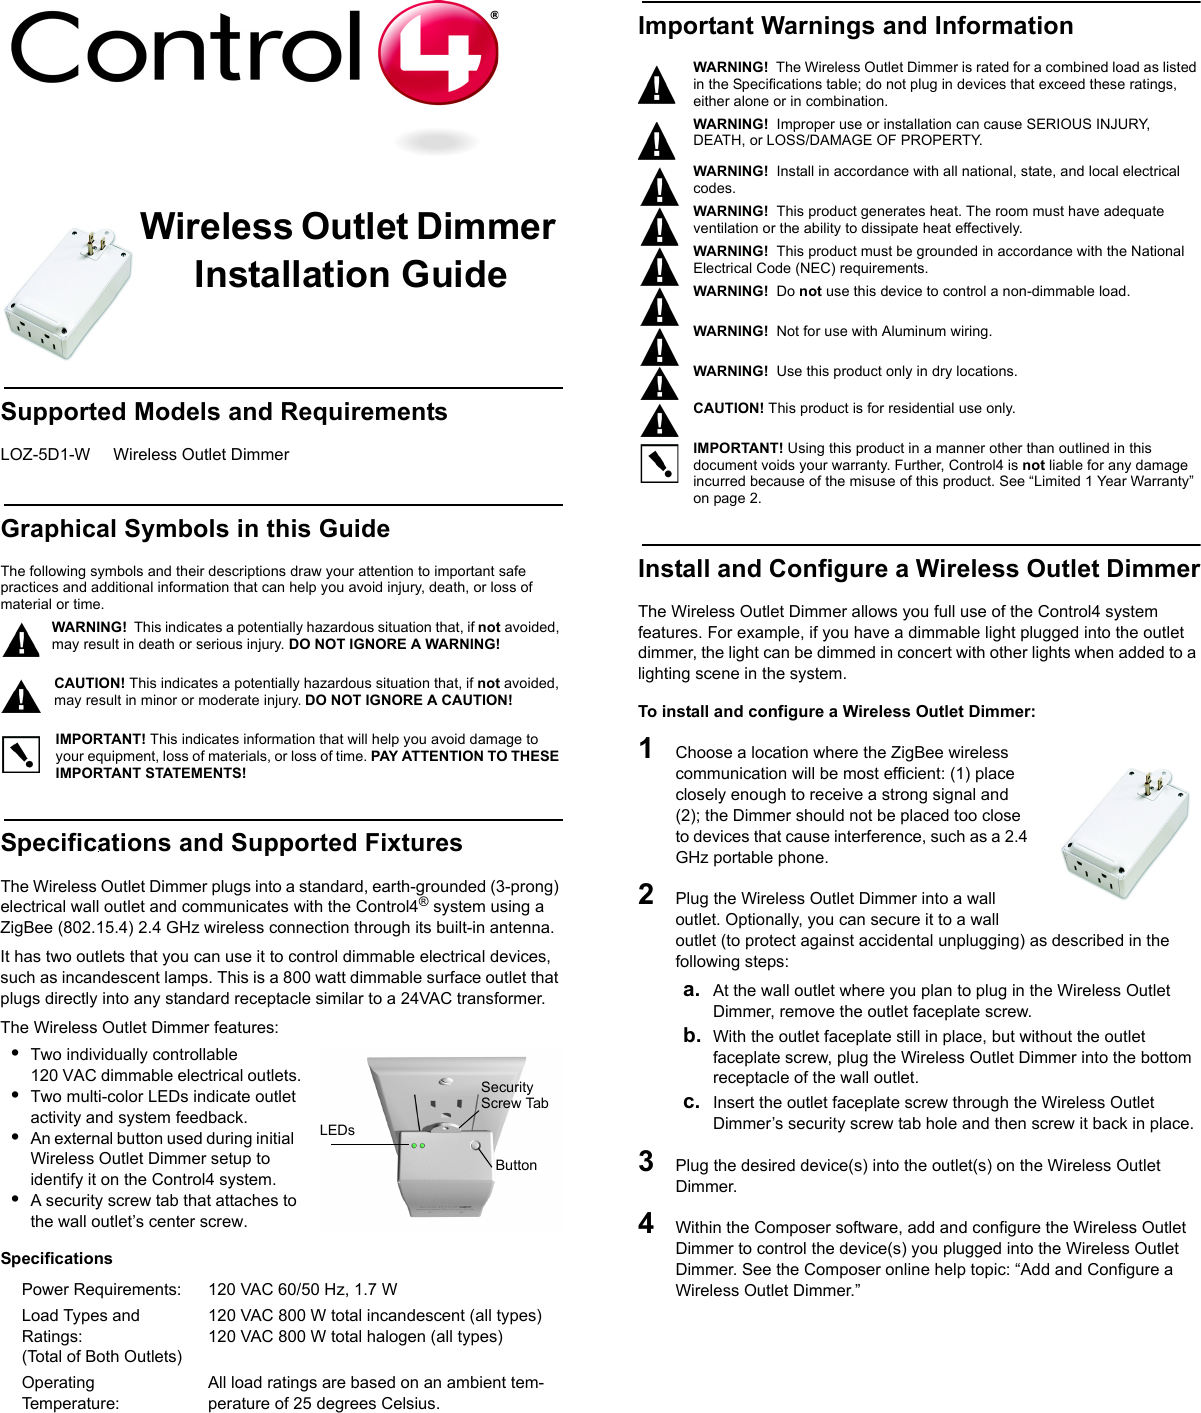                                                                                                                                                                                                                    Wireless Outlet Dimmer Installation GuideSupported Models and RequirementsLOZ-5D1-W     Wireless Outlet DimmerGraphical Symbols in this GuideThe following symbols and their descriptions draw your attention to important safe practices and additional information that can help you avoid injury, death, or loss of material or time.WARNING!  This indicates a potentially hazardous situation that, if not avoided, may result in death or serious injury. DO NOT IGNORE A WARNING!CAUTION! This indicates a potentially hazardous situation that, if not avoided, may result in minor or moderate injury. DO NOT IGNORE A CAUTION!IMPORTANT! This indicates information that will help you avoid damage to your equipment, loss of materials, or loss of time. PAY ATTENTION TO THESE IMPORTANT STATEMENTS!Specifications and Supported FixturesThe Wireless Outlet Dimmer plugs into a standard, earth-grounded (3-prong) electrical wall outlet and communicates with the Control4® system using a ZigBee (802.15.4) 2.4 GHz wireless connection through its built-in antenna. It has two outlets that you can use it to control dimmable electrical devices, such as incandescent lamps. This is a 800 watt dimmable surface outlet that plugs directly into any standard receptacle similar to a 24VAC transformer.The Wireless Outlet Dimmer features:•Two individually controllable 120 VAC dimmable electrical outlets.•Two multi-color LEDs indicate outlet activity and system feedback.•An external button used during initial  Wireless Outlet Dimmer setup to identify it on the Control4 system.•A security screw tab that attaches to the wall outlet’s center screw.Specifications Important Warnings and InformationWARNING!  The Wireless Outlet Dimmer is rated for a combined load as listed in the Specifications table; do not plug in devices that exceed these ratings, either alone or in combination.WARNING!  Improper use or installation can cause SERIOUS INJURY, DEATH, or LOSS/DAMAGE OF PROPERTY. WARNING!  Install in accordance with all national, state, and local electrical codes.WARNING!  This product generates heat. The room must have adequate ventilation or the ability to dissipate heat effectively.WARNING!  This product must be grounded in accordance with the National Electrical Code (NEC) requirements.WARNING!  Do not use this device to control a non-dimmable load. WARNING!  Not for use with Aluminum wiring.   WARNING!  Use this product only in dry locations.       CAUTION! This product is for residential use only.   IMPORTANT! Using this product in a manner other than outlined in this document voids your warranty. Further, Control4 is not liable for any damage incurred because of the misuse of this product. See “Limited 1 Year Warranty” on page 2. Install and Configure a Wireless Outlet DimmerThe Wireless Outlet Dimmer allows you full use of the Control4 system features. For example, if you have a dimmable light plugged into the outlet dimmer, the light can be dimmed in concert with other lights when added to a lighting scene in the system.To install and configure a Wireless Outlet Dimmer:1   Choose a location where the ZigBee wireless communication will be most efficient: (1) place closely enough to receive a strong signal and (2); the Dimmer should not be placed too close to devices that cause interference, such as a 2.4 GHz portable phone. 2   Plug the Wireless Outlet Dimmer into a wall outlet. Optionally, you can secure it to a wall outlet (to protect against accidental unplugging) as described in the following steps:a. At the wall outlet where you plan to plug in the Wireless Outlet Dimmer, remove the outlet faceplate screw.b. With the outlet faceplate still in place, but without the outlet faceplate screw, plug the Wireless Outlet Dimmer into the bottom receptacle of the wall outlet.c. Insert the outlet faceplate screw through the Wireless Outlet Dimmer’s security screw tab hole and then screw it back in place.3   Plug the desired device(s) into the outlet(s) on the Wireless Outlet Dimmer. 4   Within the Composer software, add and configure the Wireless Outlet Dimmer to control the device(s) you plugged into the Wireless Outlet Dimmer. See the Composer online help topic: “Add and Configure a Wireless Outlet Dimmer.” Power Requirements:  120 VAC 60/50 Hz, 1.7 WLoad Types and Ratings:(Total of Both Outlets)120 VAC 800 W total incandescent (all types)120 VAC 800 W total halogen (all types)Operating Temperature: All load ratings are based on an ambient tem-perature of 25 degrees Celsius.LEDsButtonSecurityScrew Tab